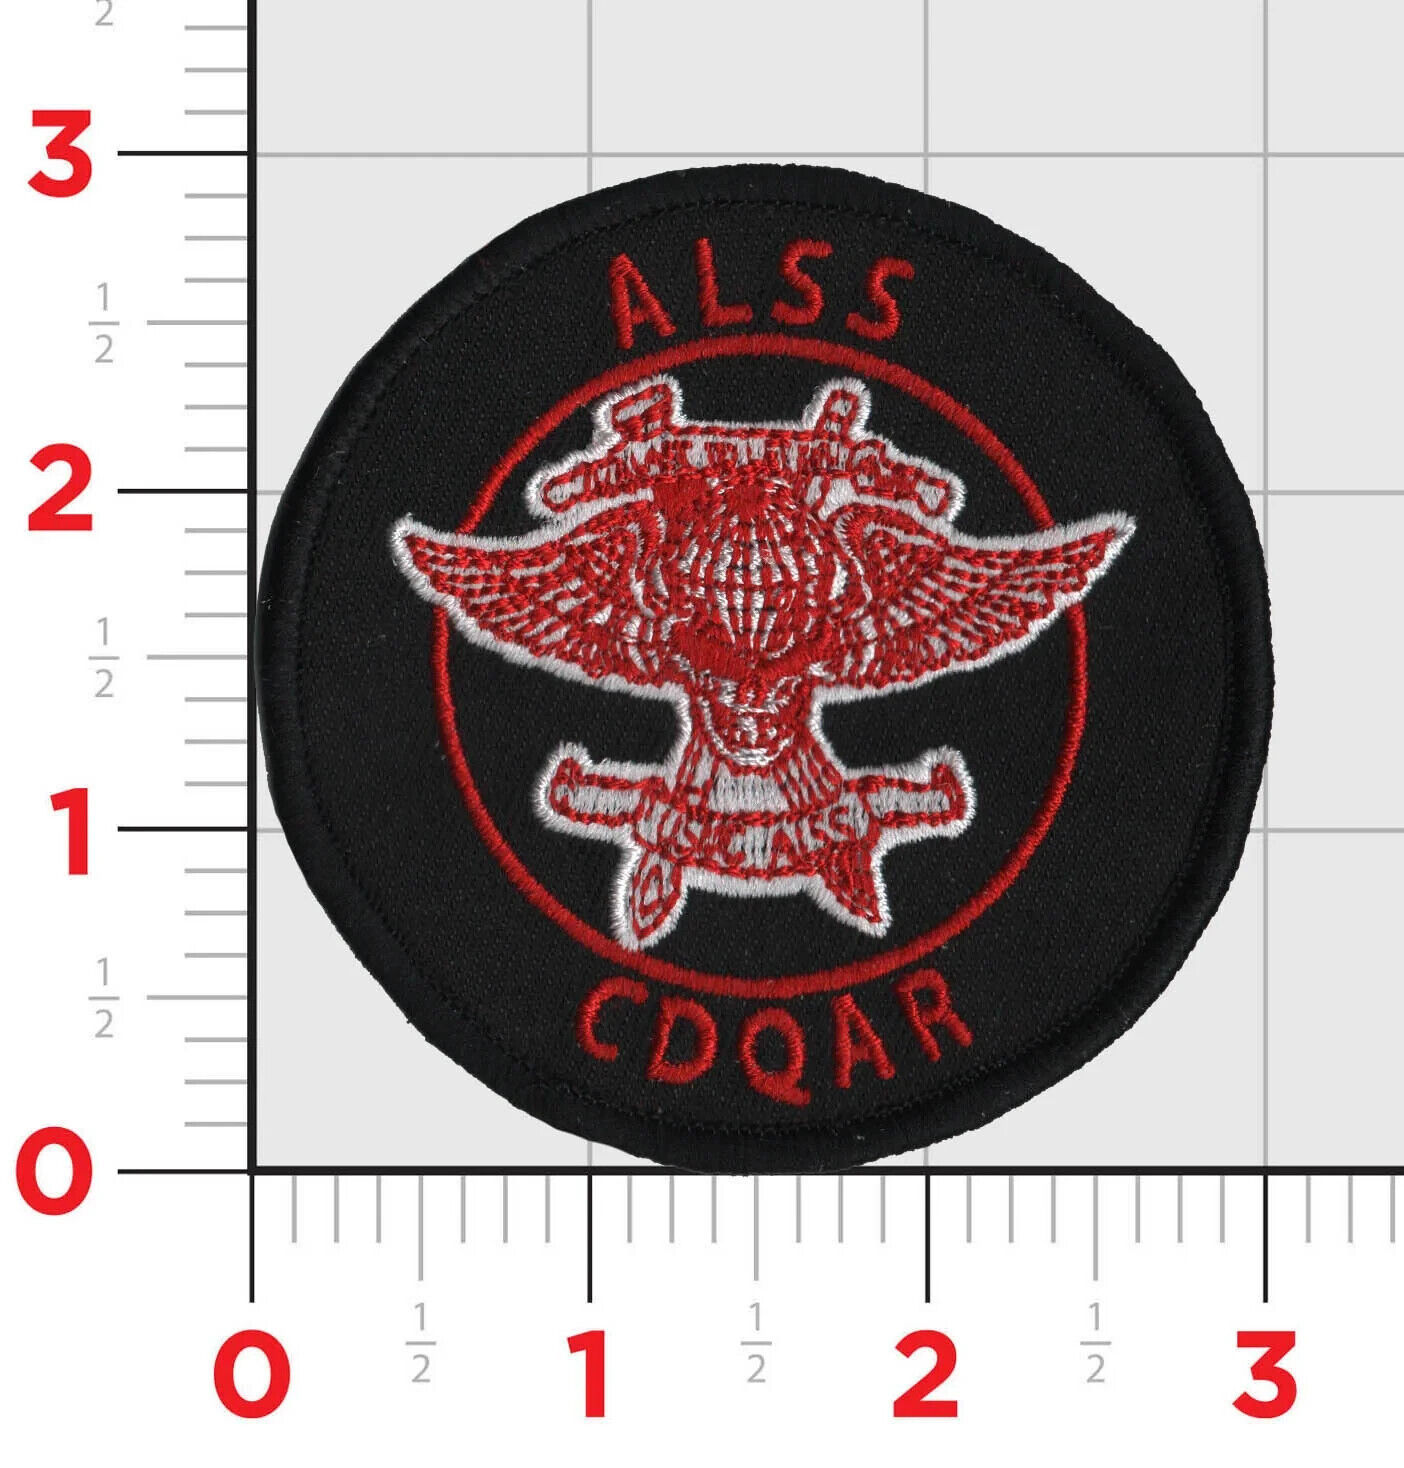 ALSS AVIATION LIFE SUPPORT QUAL QUALIFICATION CDQAR HOOK LOOP EMBROIDERED PATCH